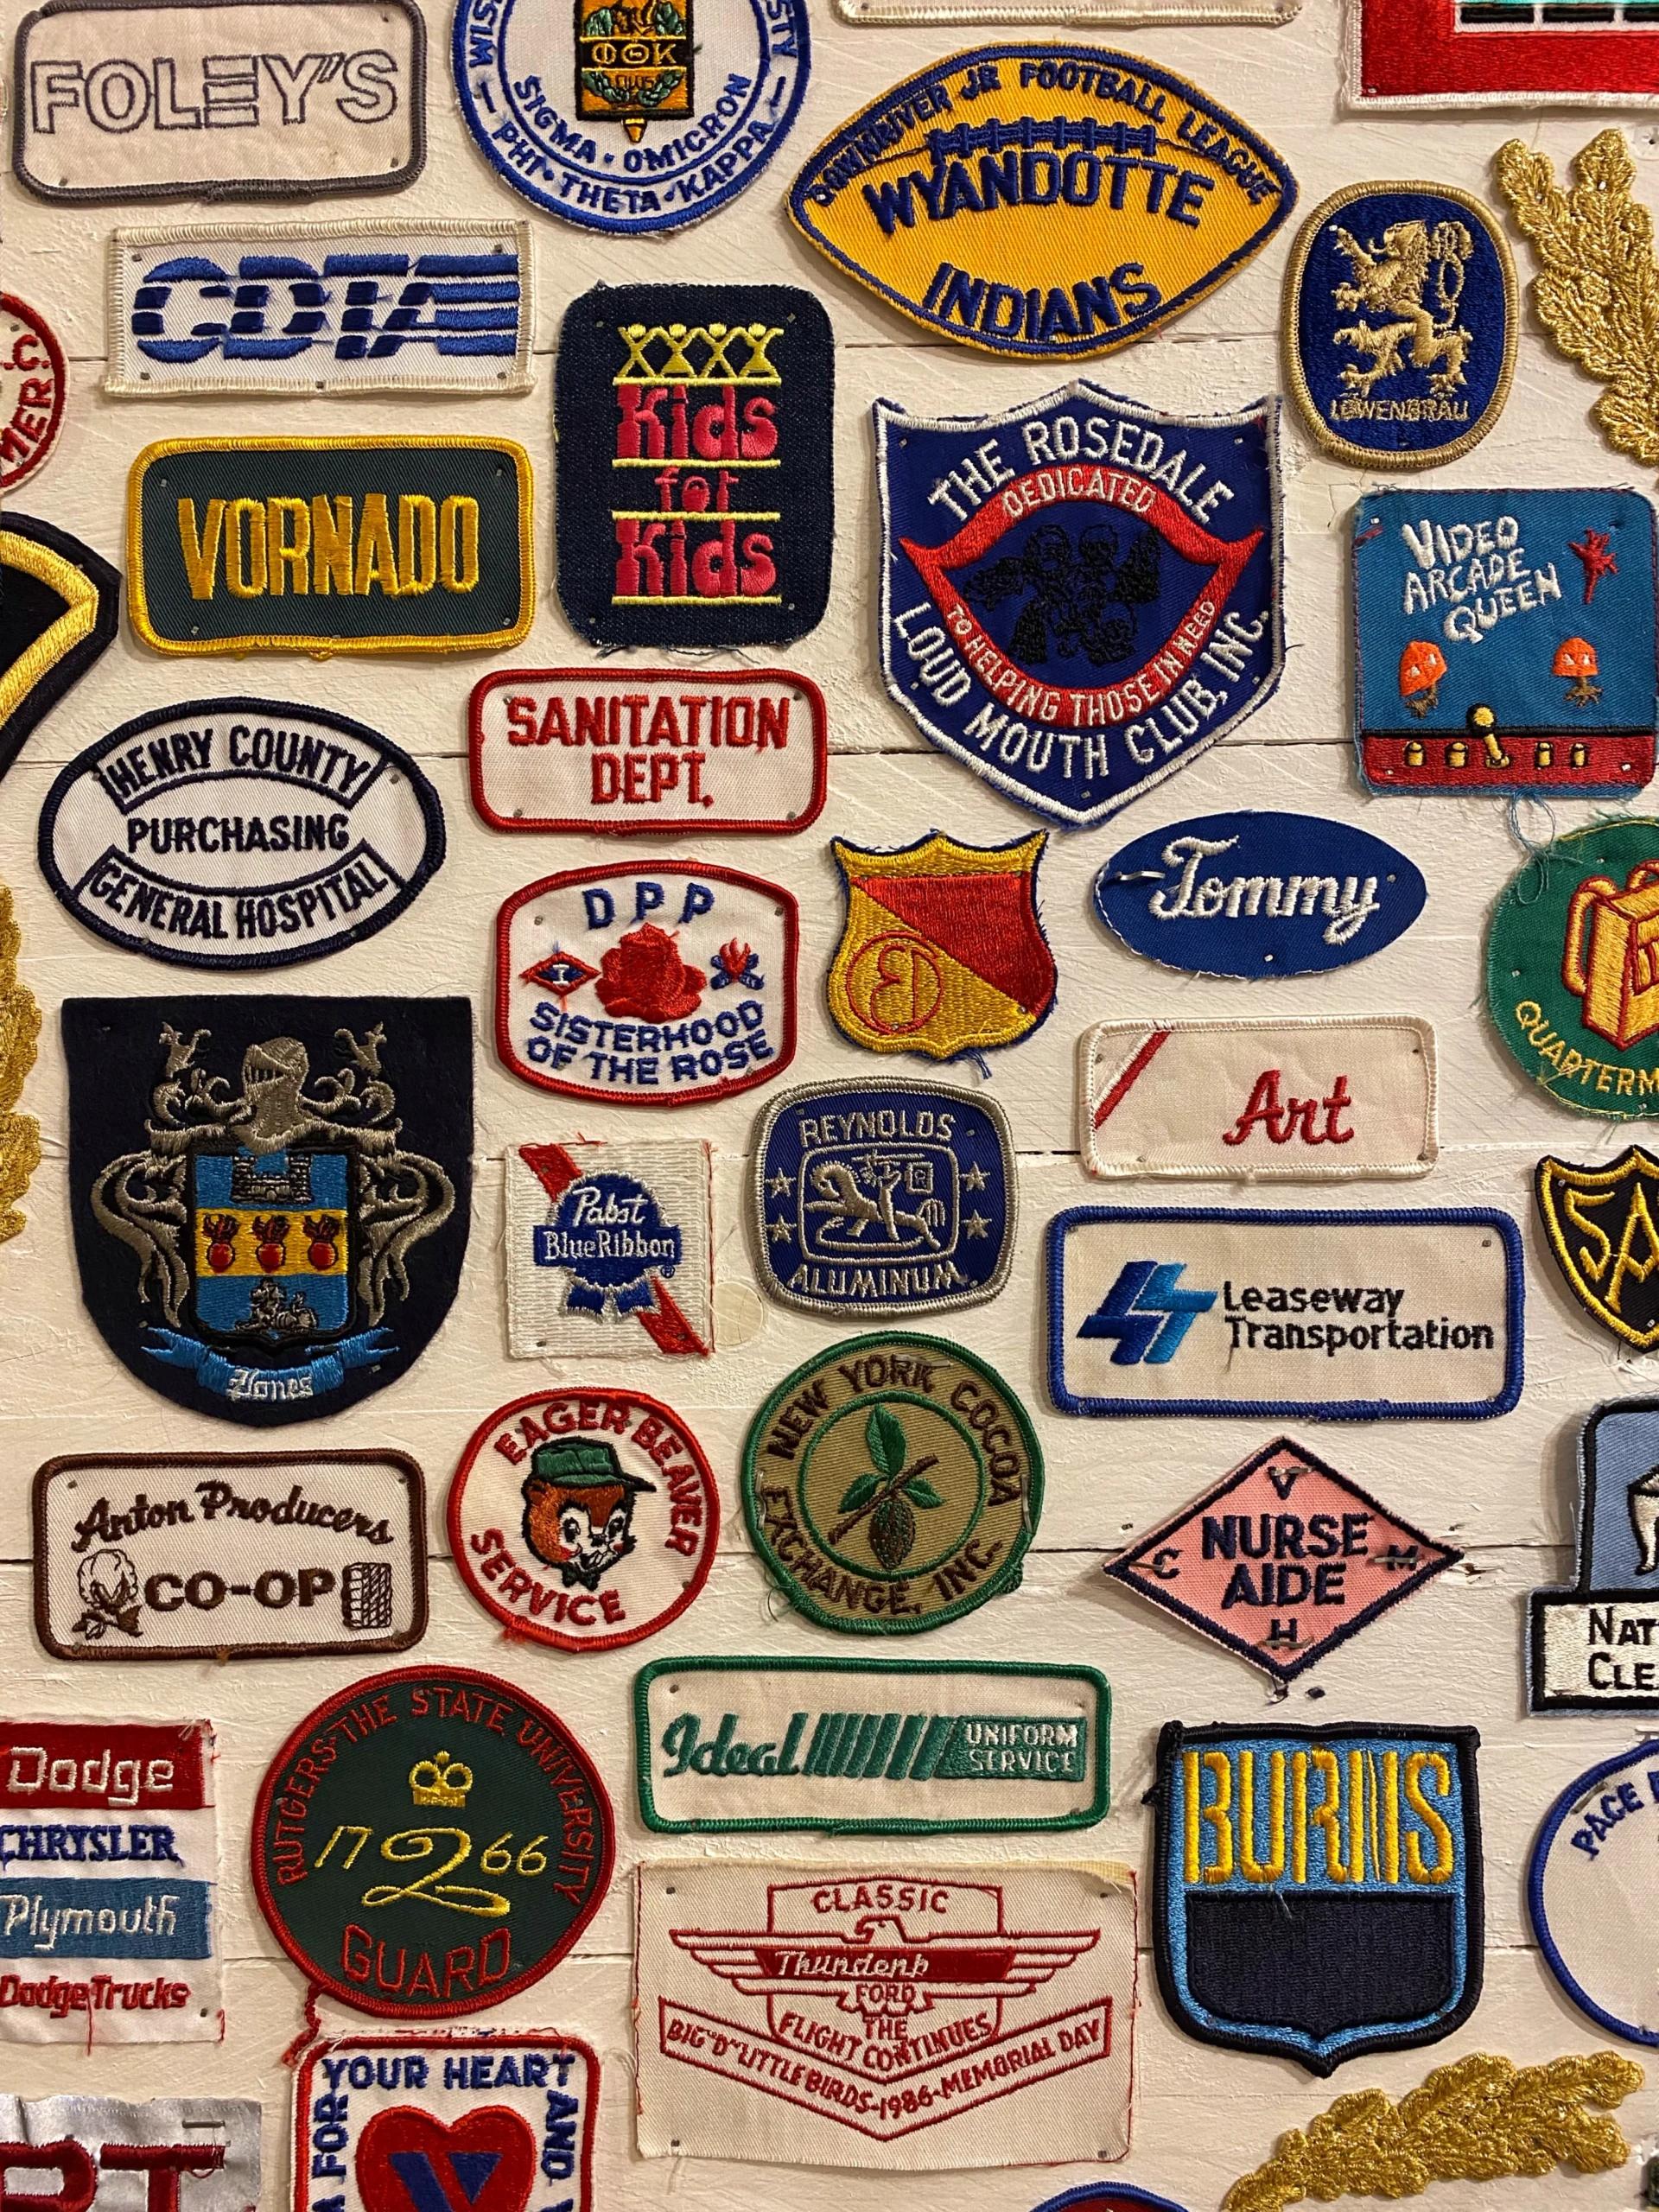 Stickers of multiple corporate logos